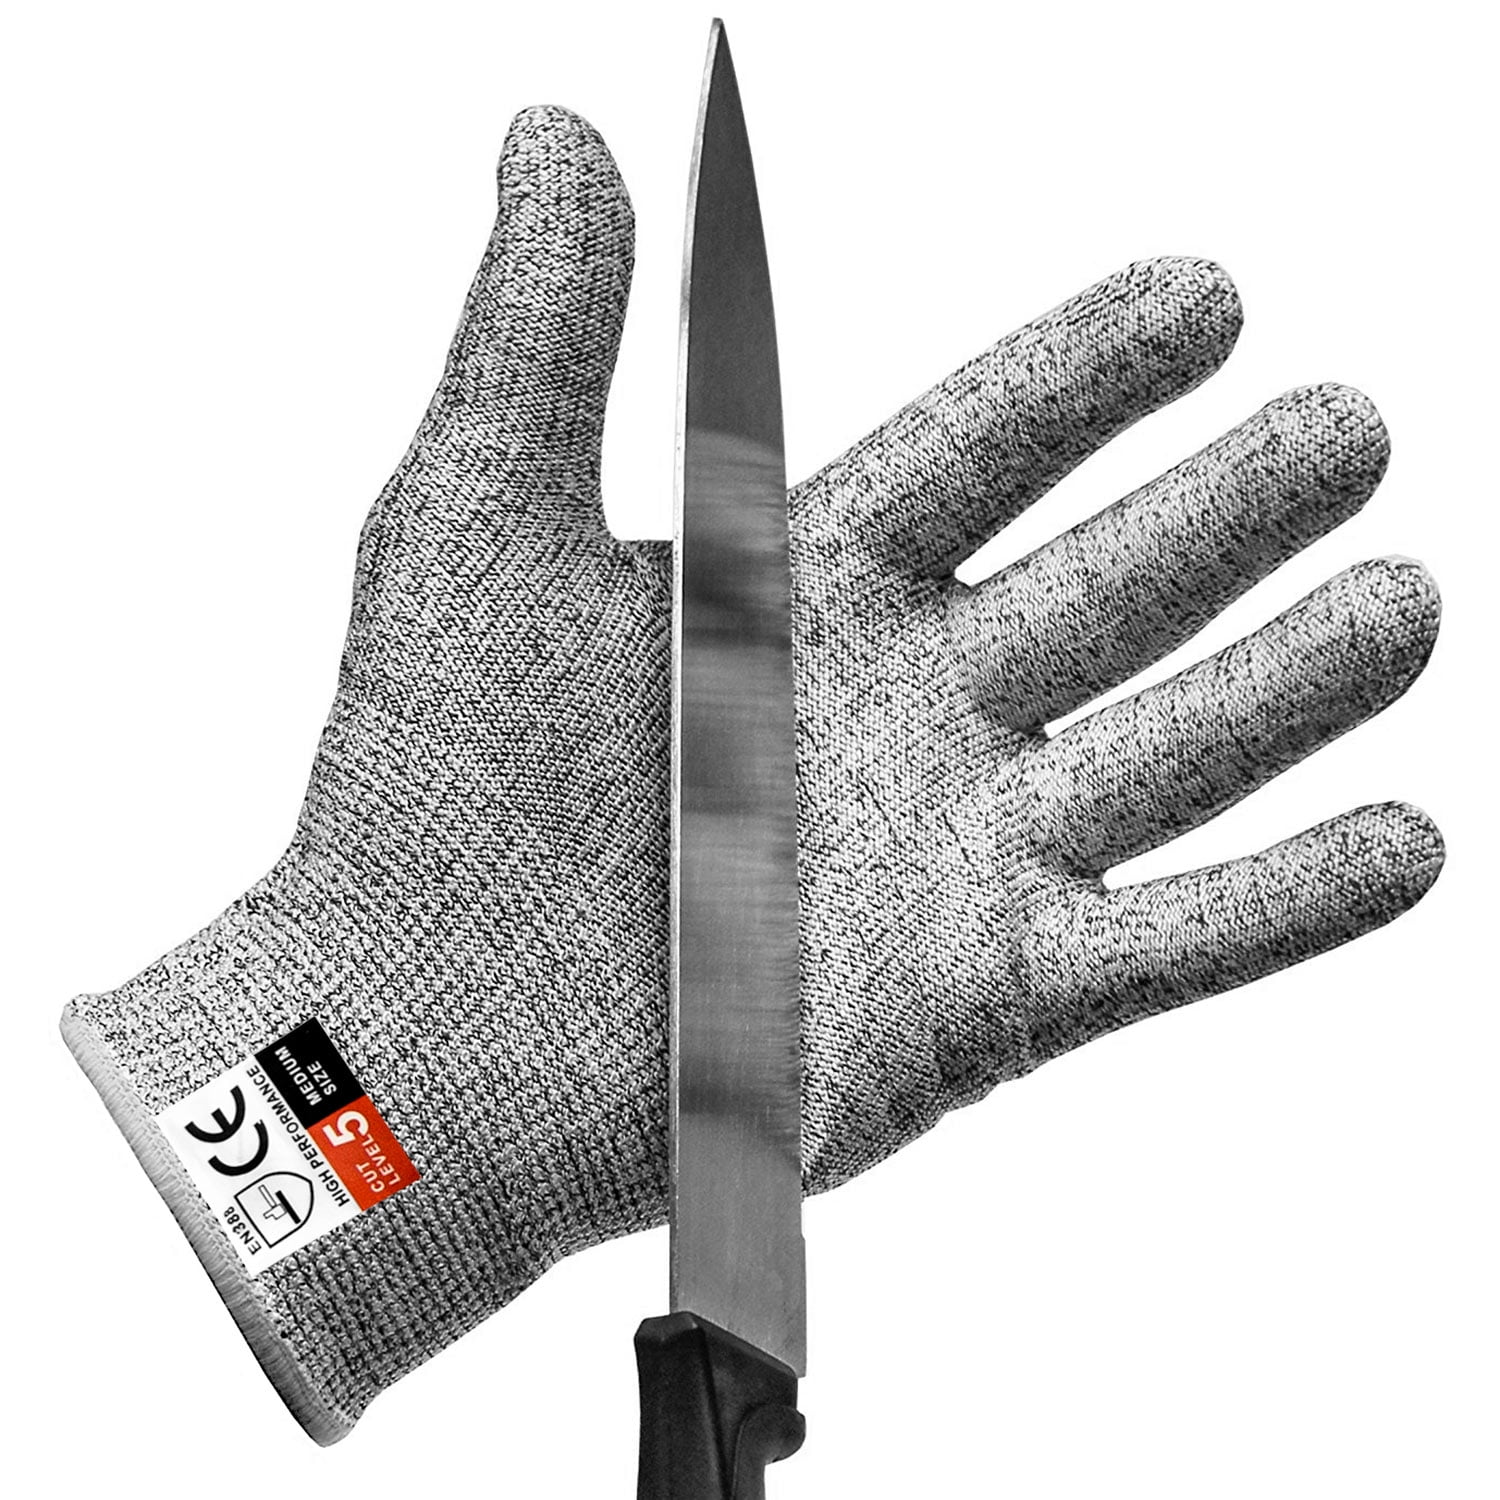 Level 5 Cut Resistant Gloves High Performance Protection Safety BBQ Gloves M 